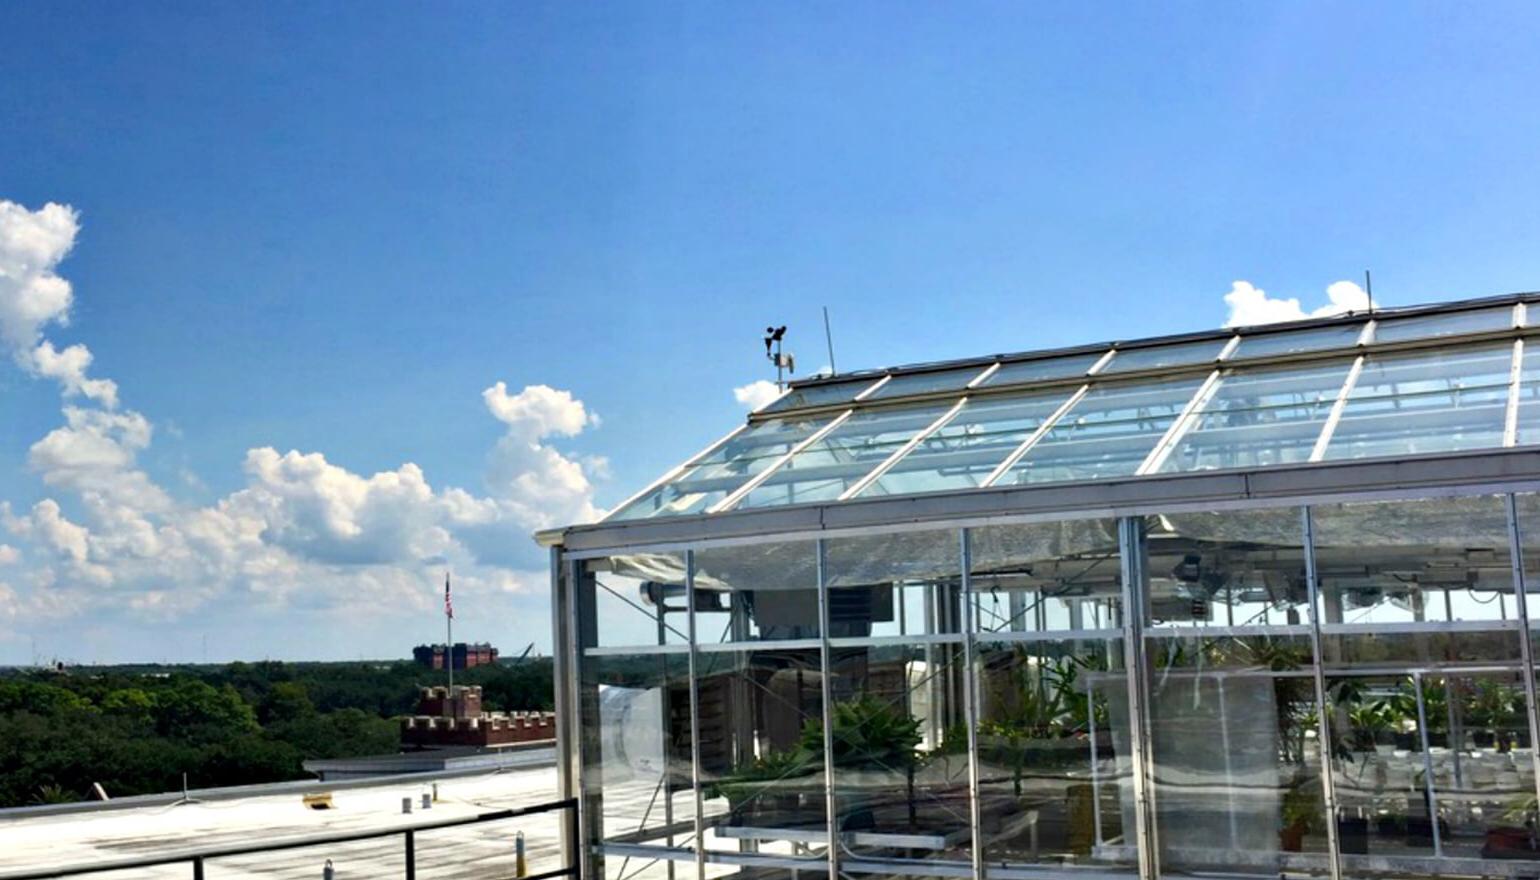 View of rooftop greenhouse